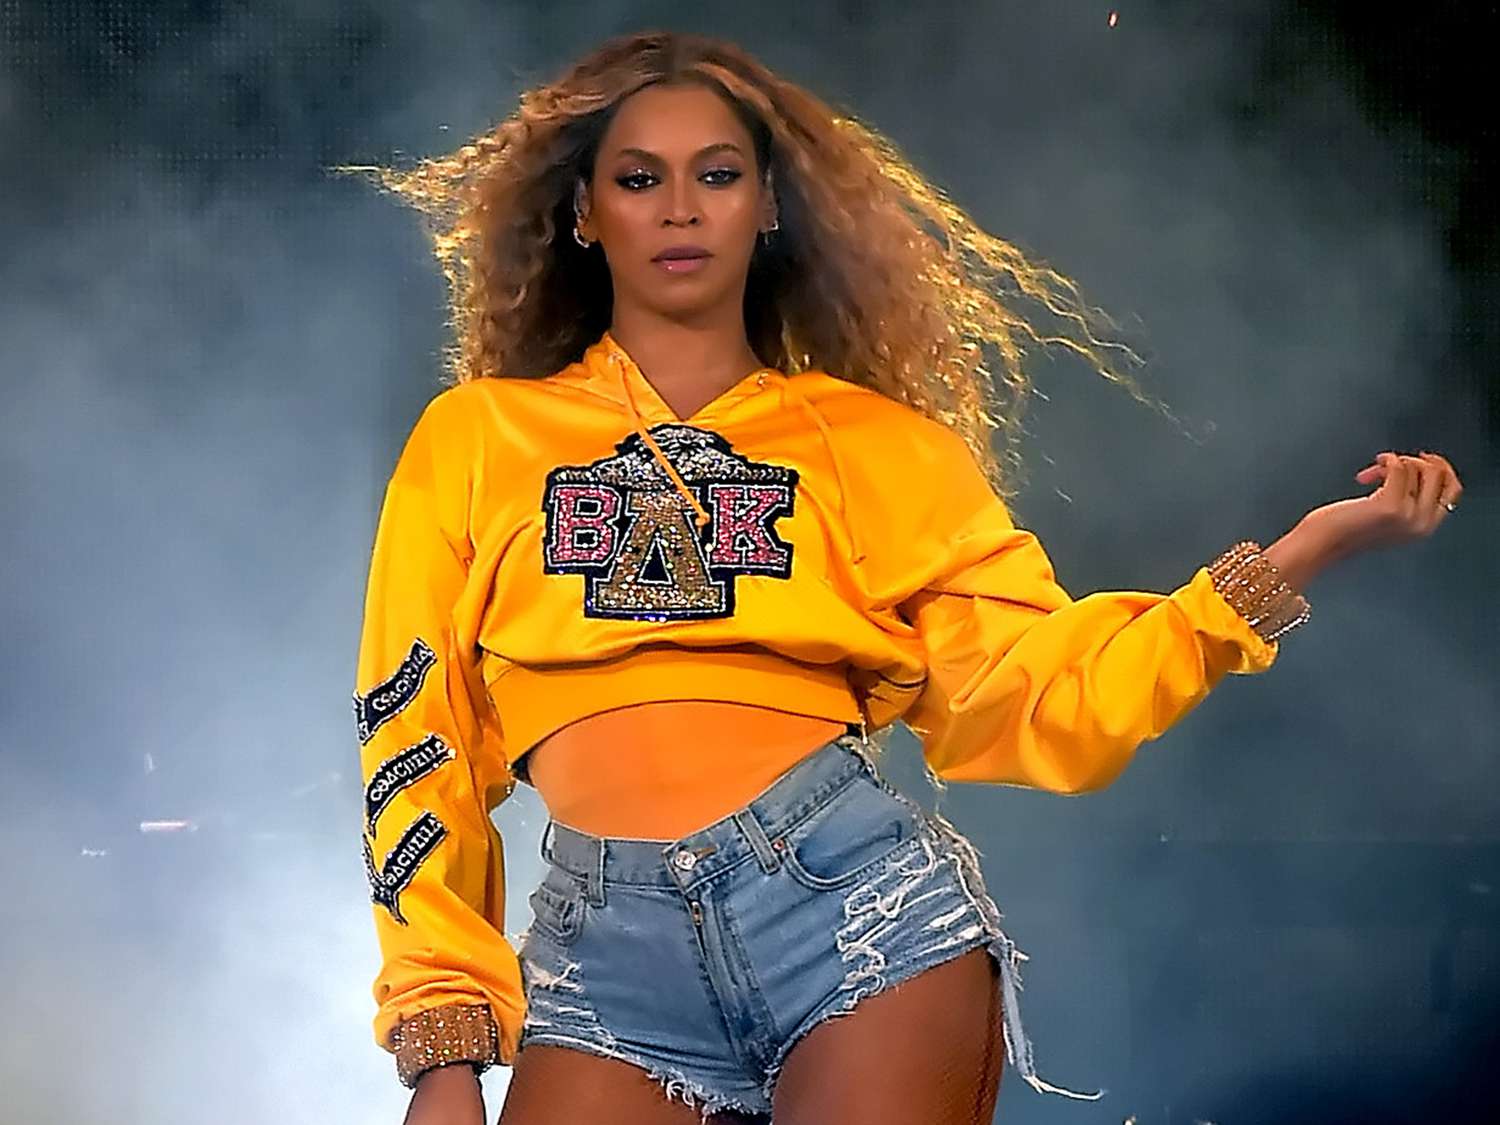 Beyonce Knowles performs onstage during 2018 Coachella Valley Music And Arts Festival on April 14, 2018 in Indio, California. 